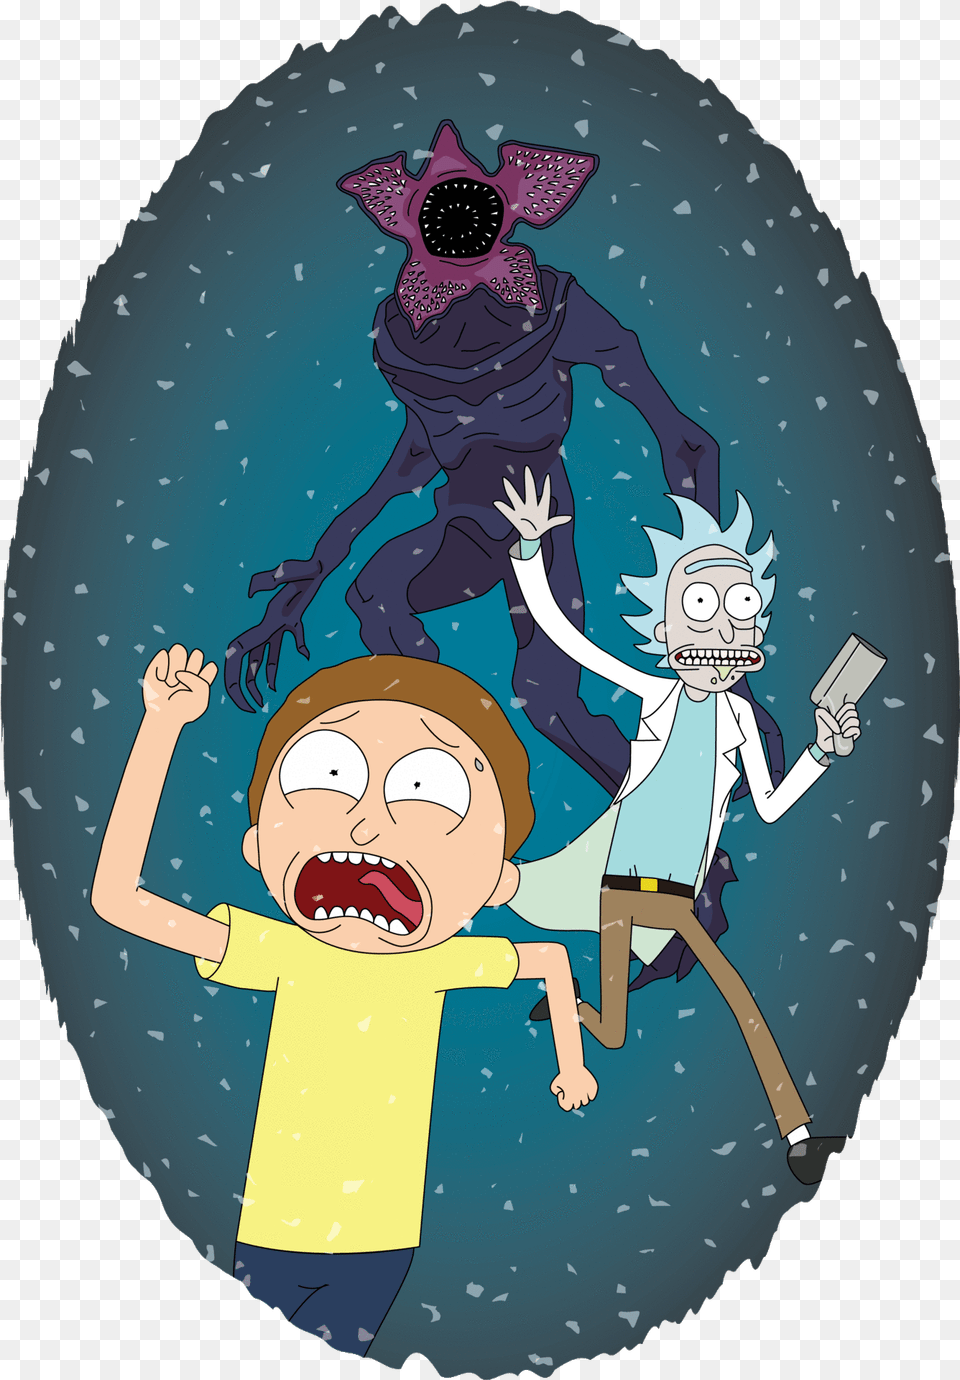 Rick And Morty In The Upside Down Iphone Rick And Morty, Book, Comics, Publication, Photography Png Image